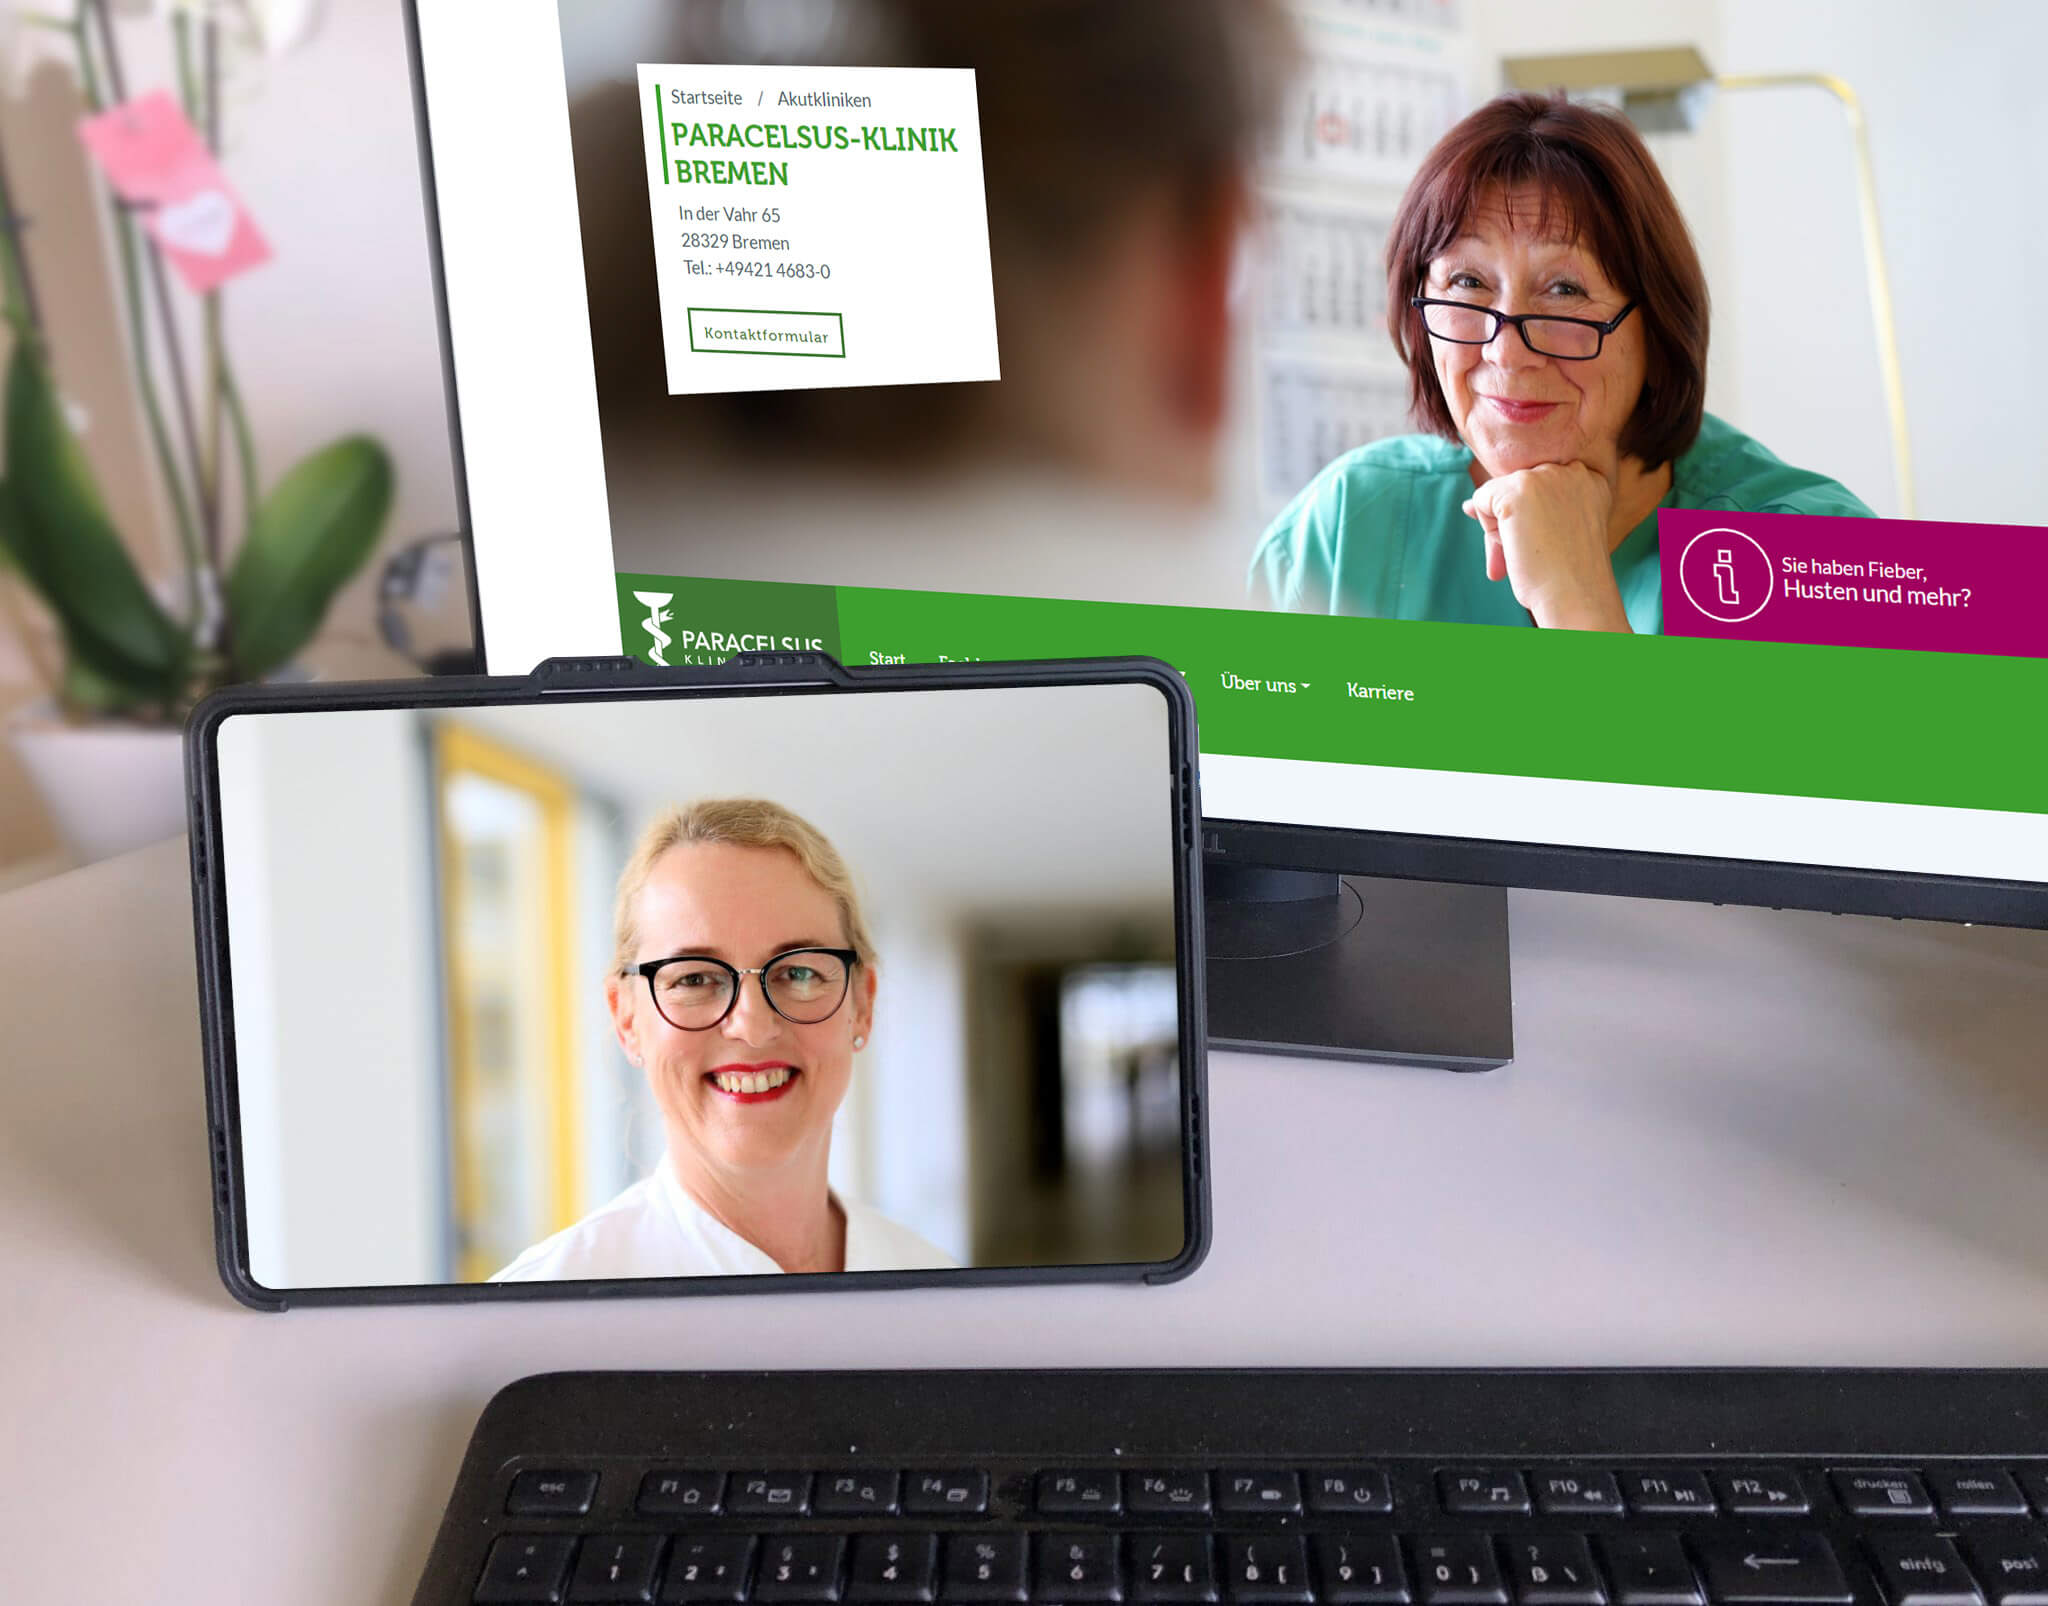 Virtual doctor appointment in a video conference